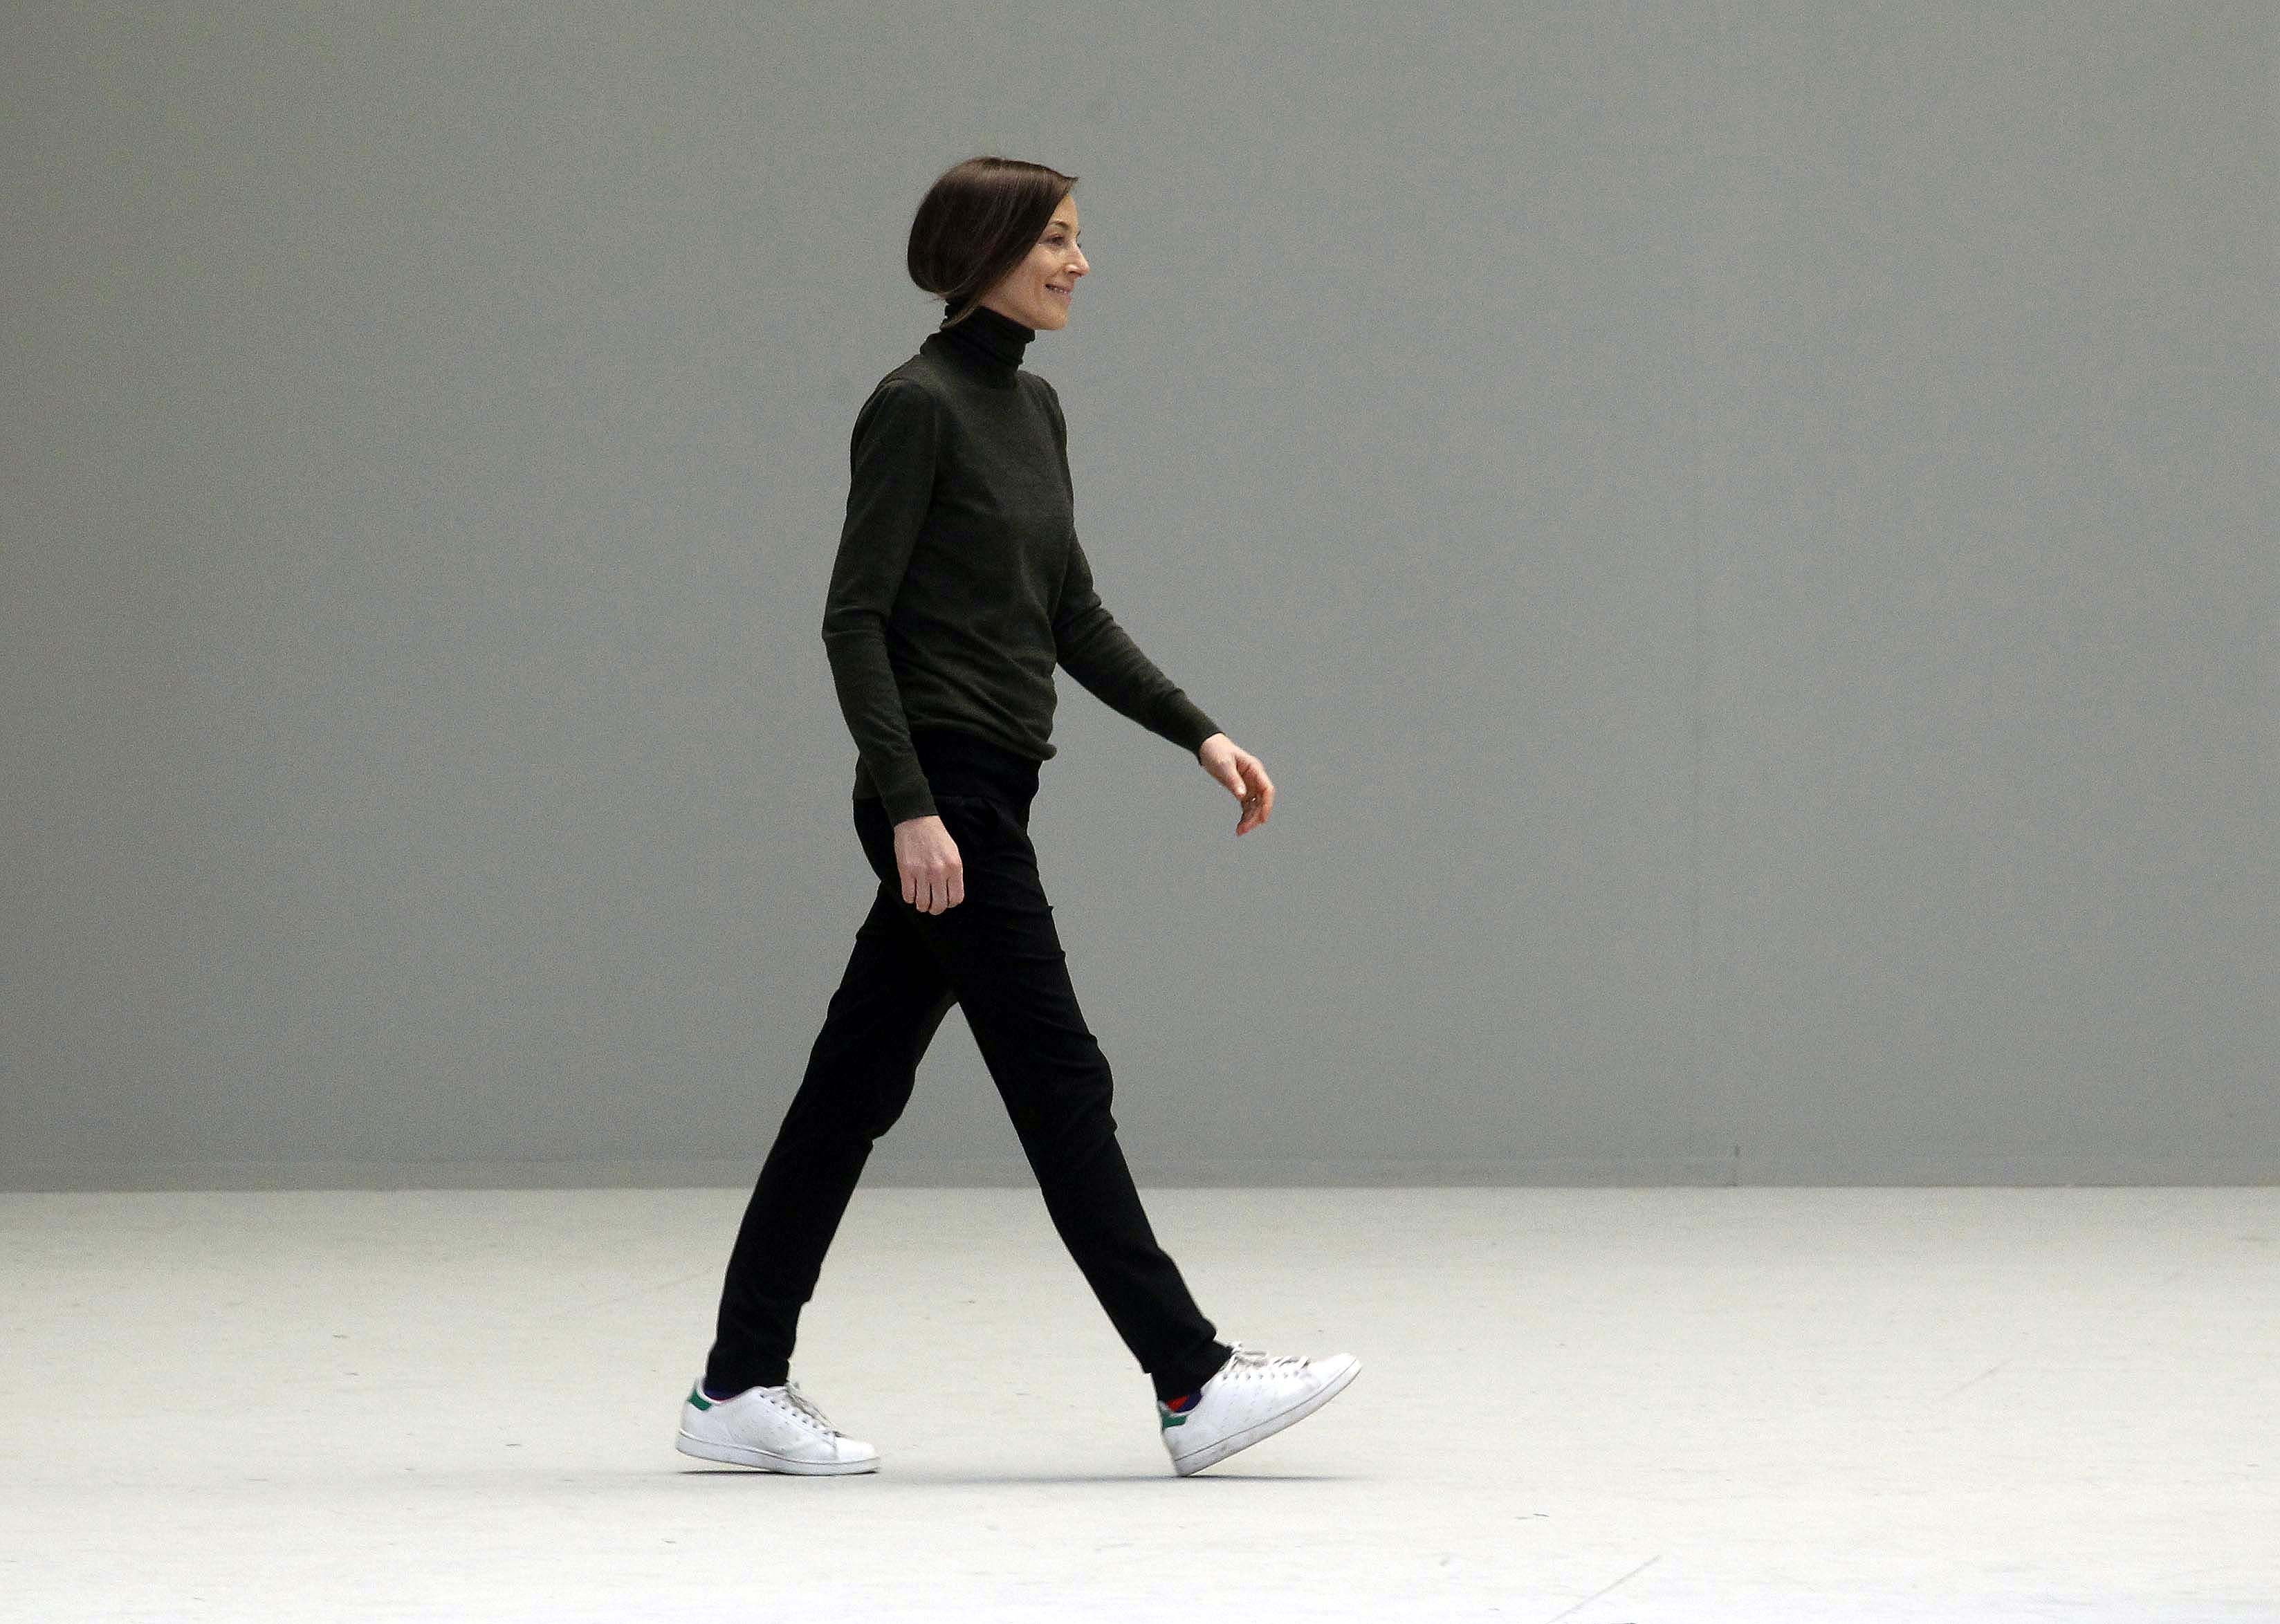 ABout: Phoebe Philo. Who is Phoebe Philo?, by Arkananta